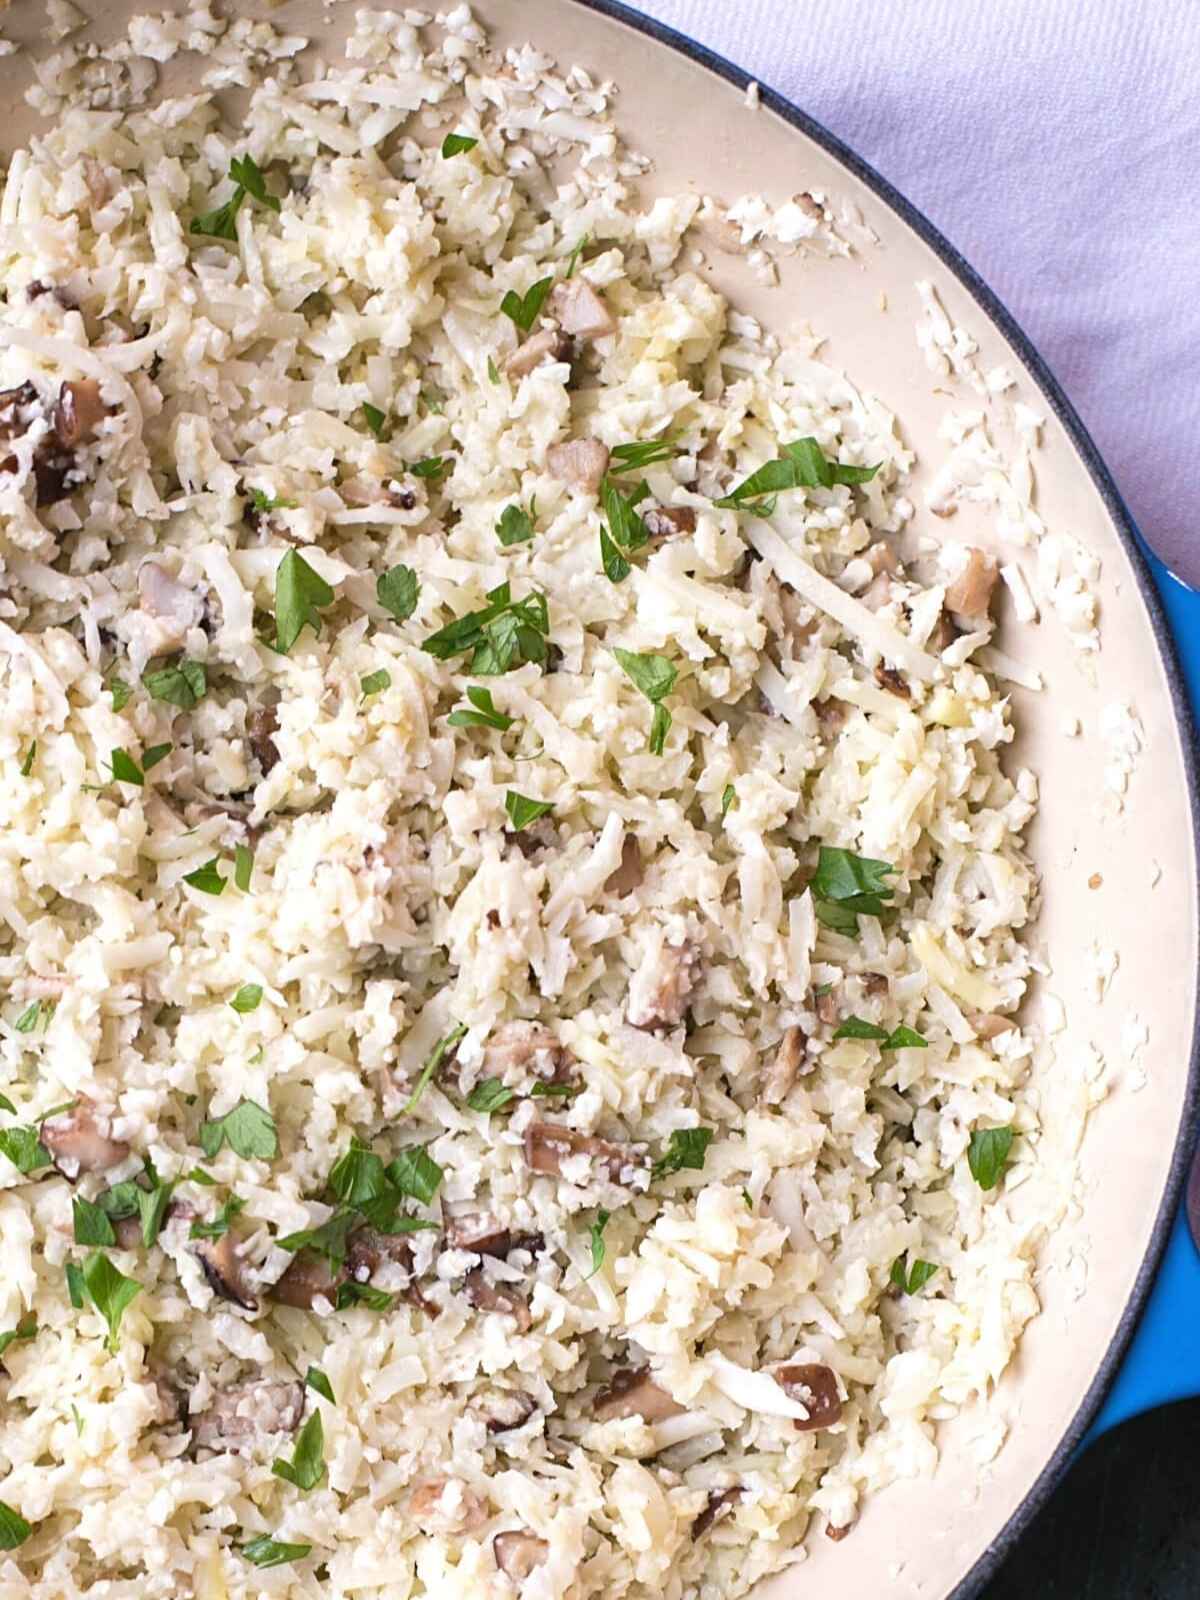 Pan filled with white color cauliflower rice.